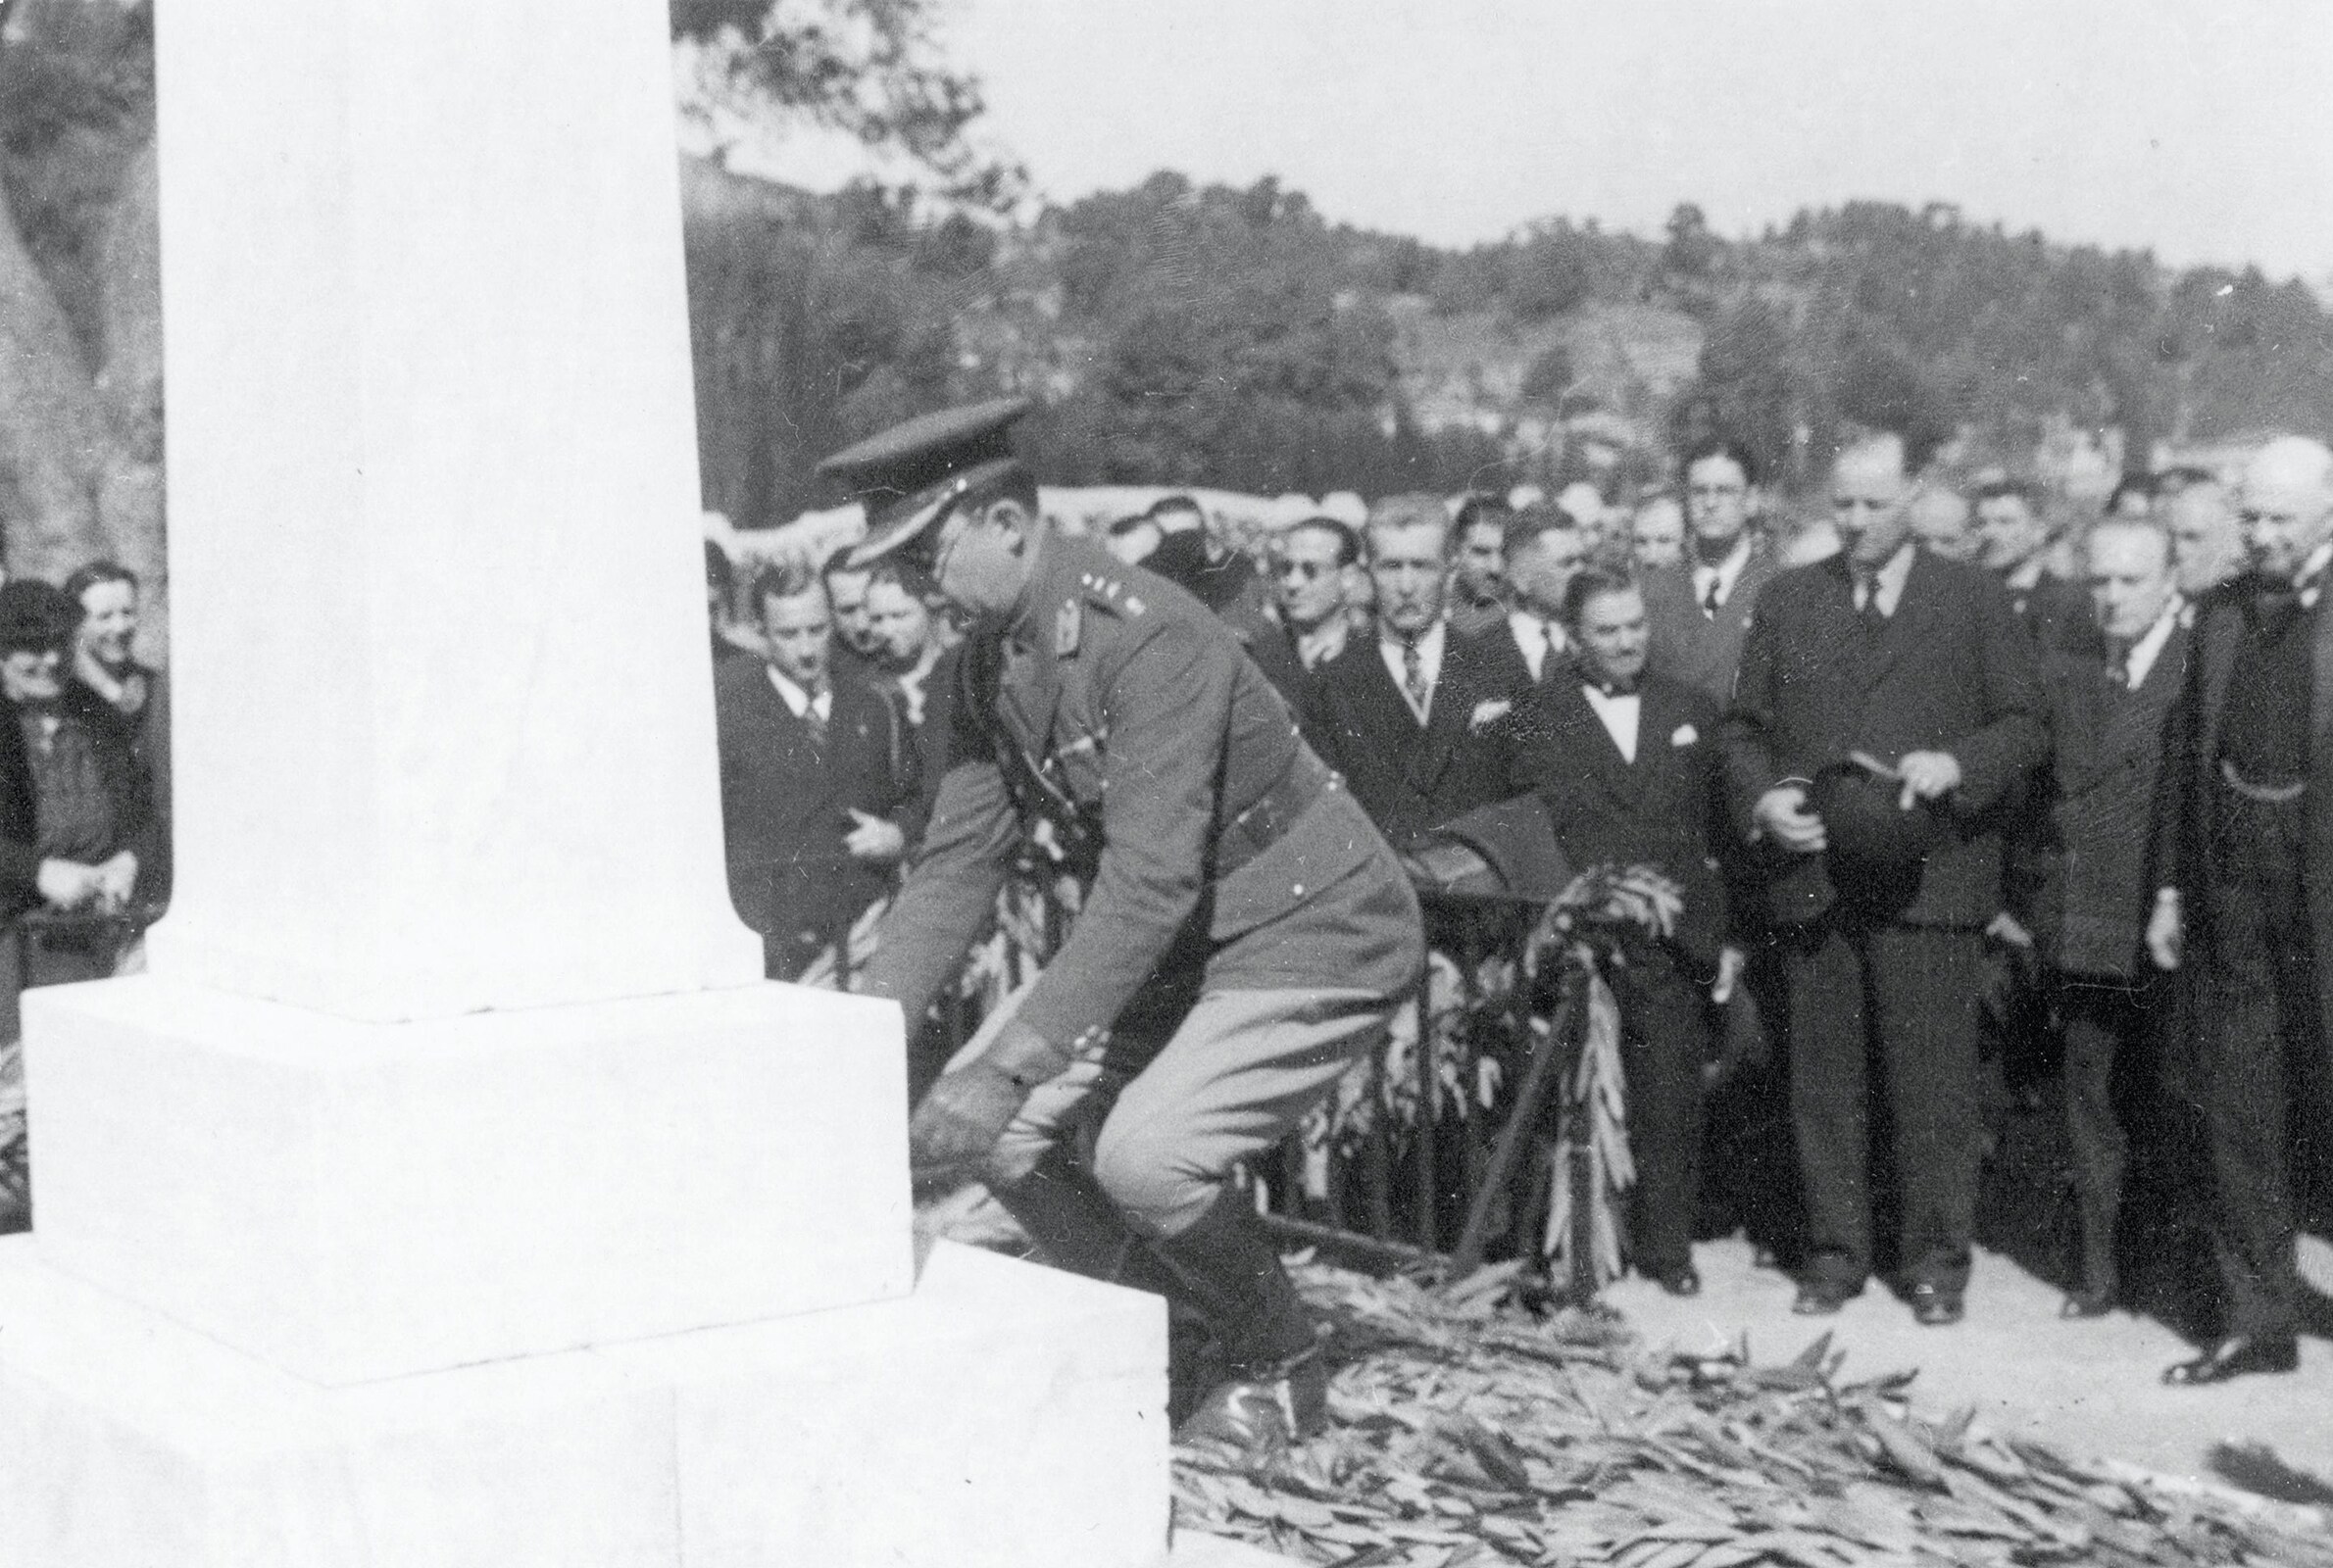 Ceremony of transfer of Baron Pierre de COUBERTIN's heart at Olympia, 1938 - Crown Prince Paul of Greece places the urn with Coubertin’s heart in the bottom of the stele dedicated to the Baron. 